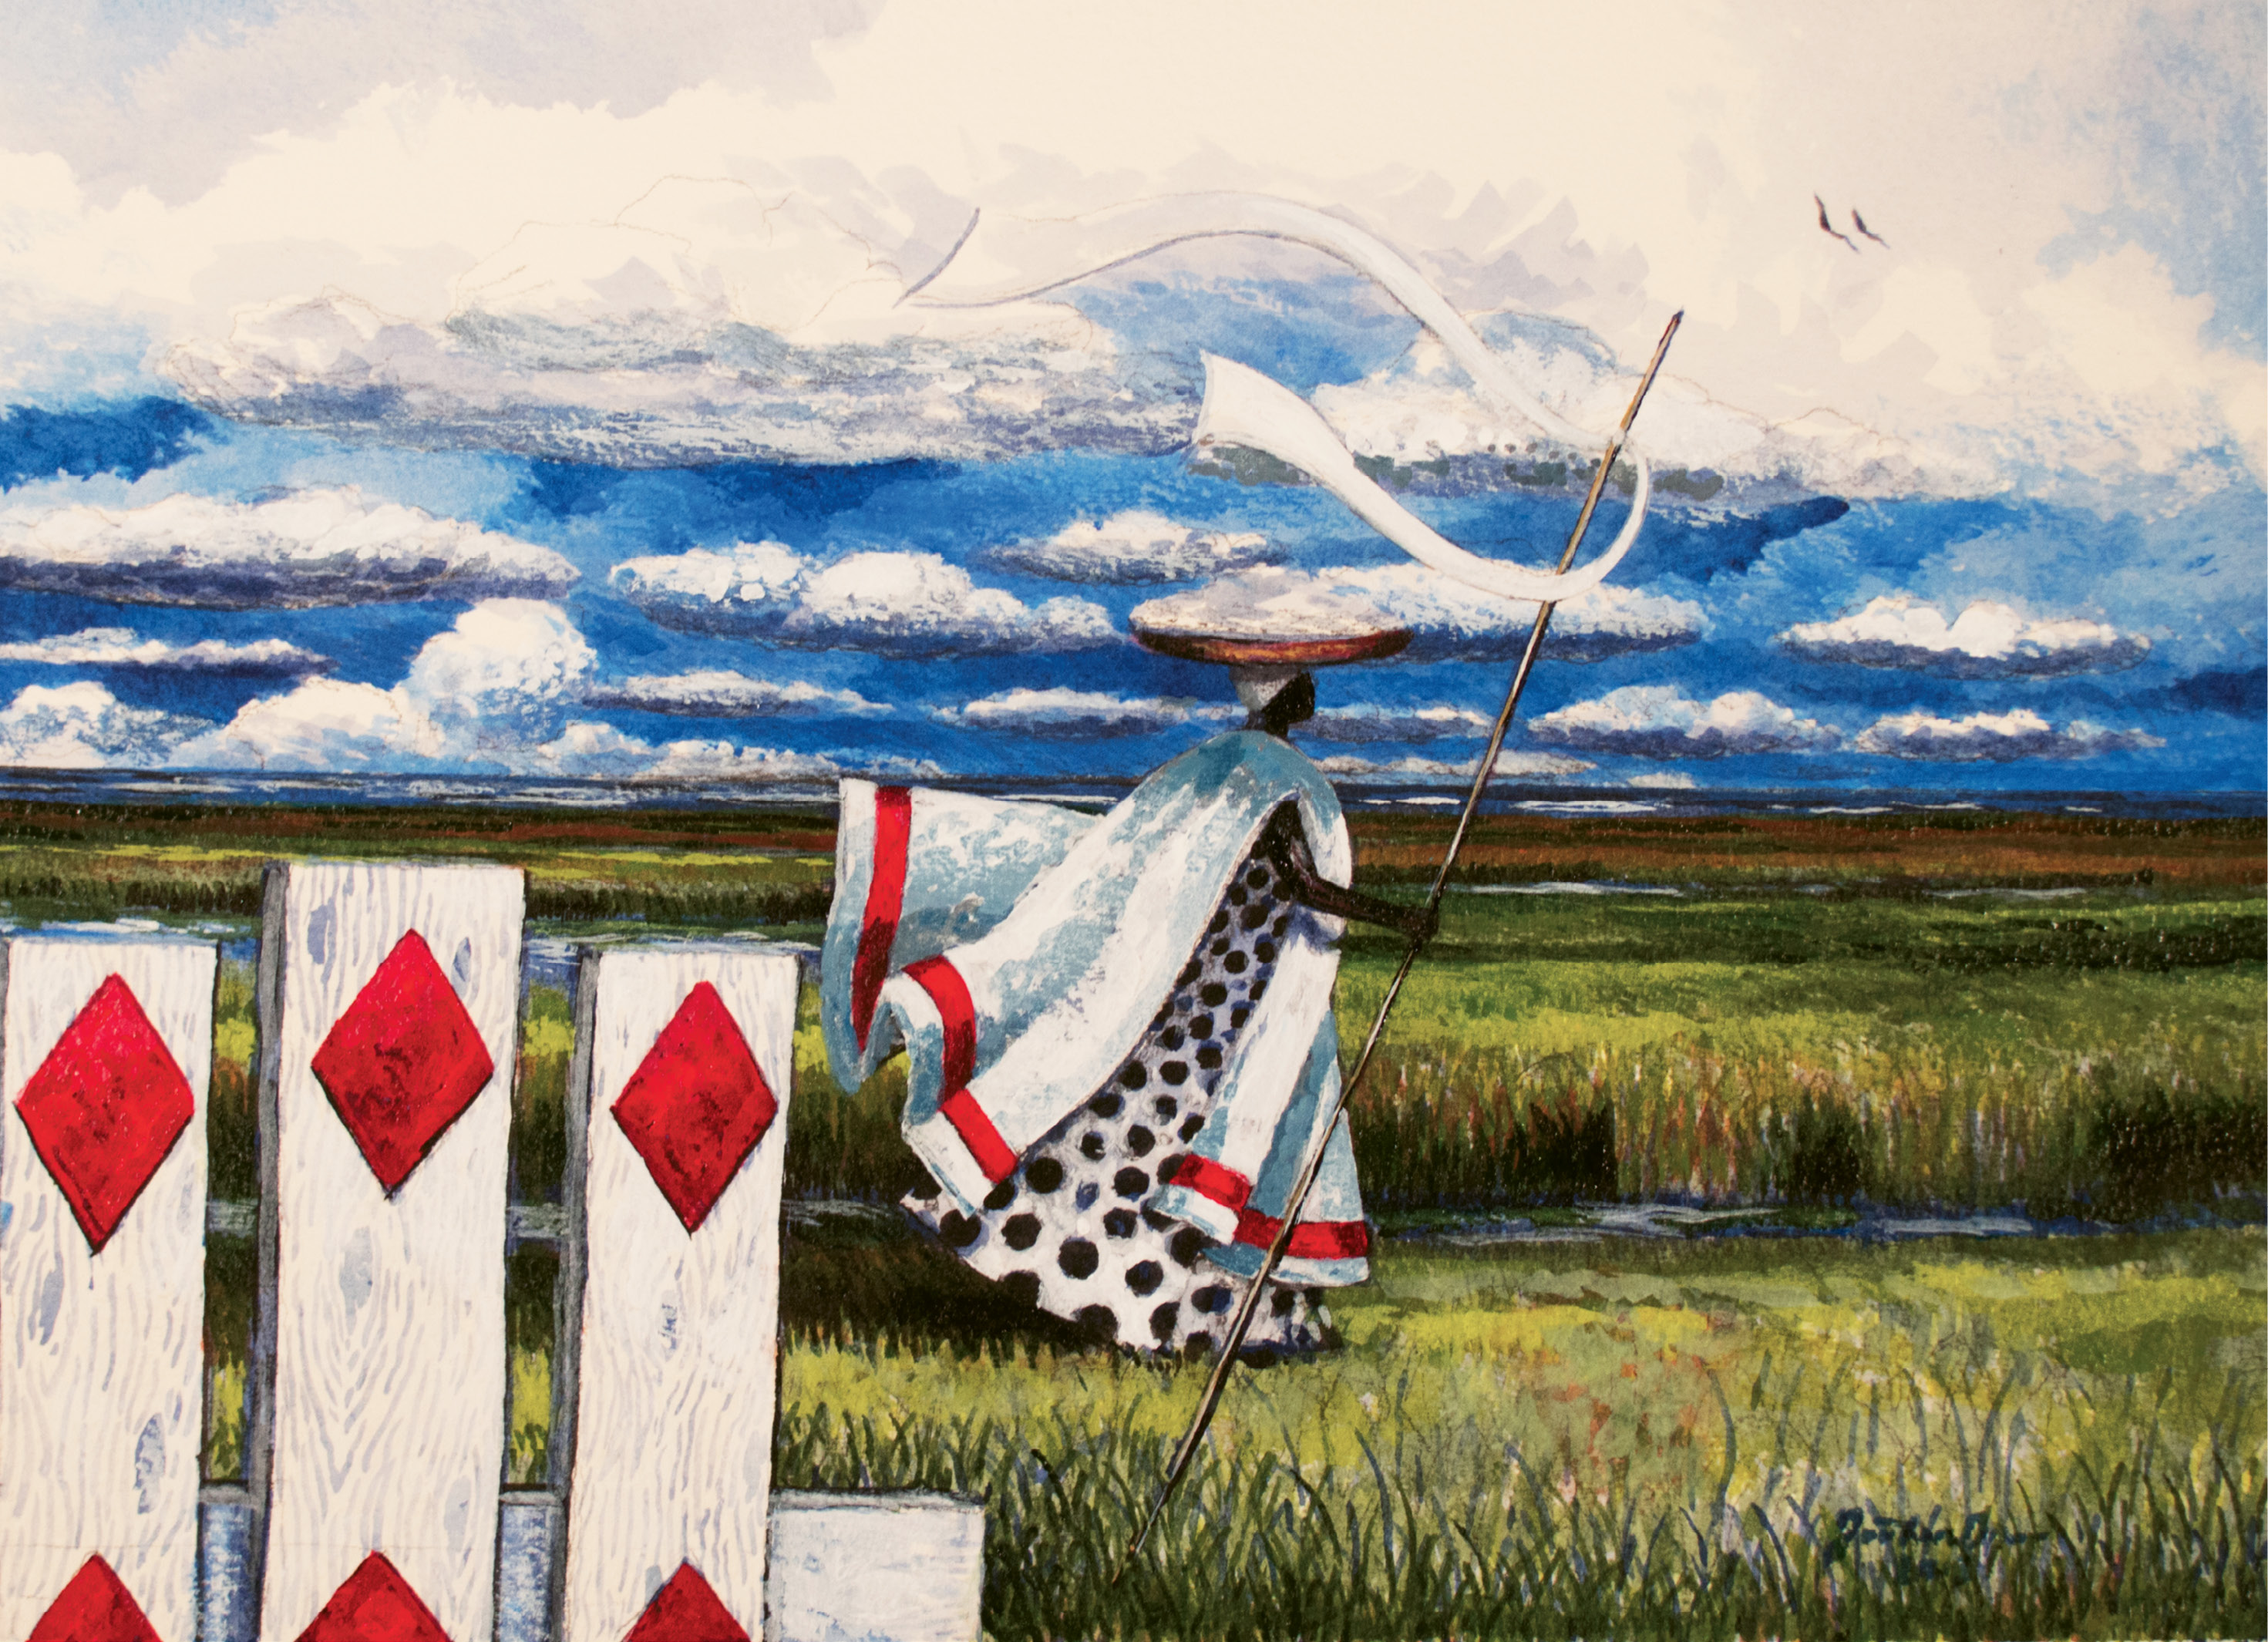 Strolling by a Sluice Gate (acrylic on watercolor, 11 X 14 1/2 inches, 2012)